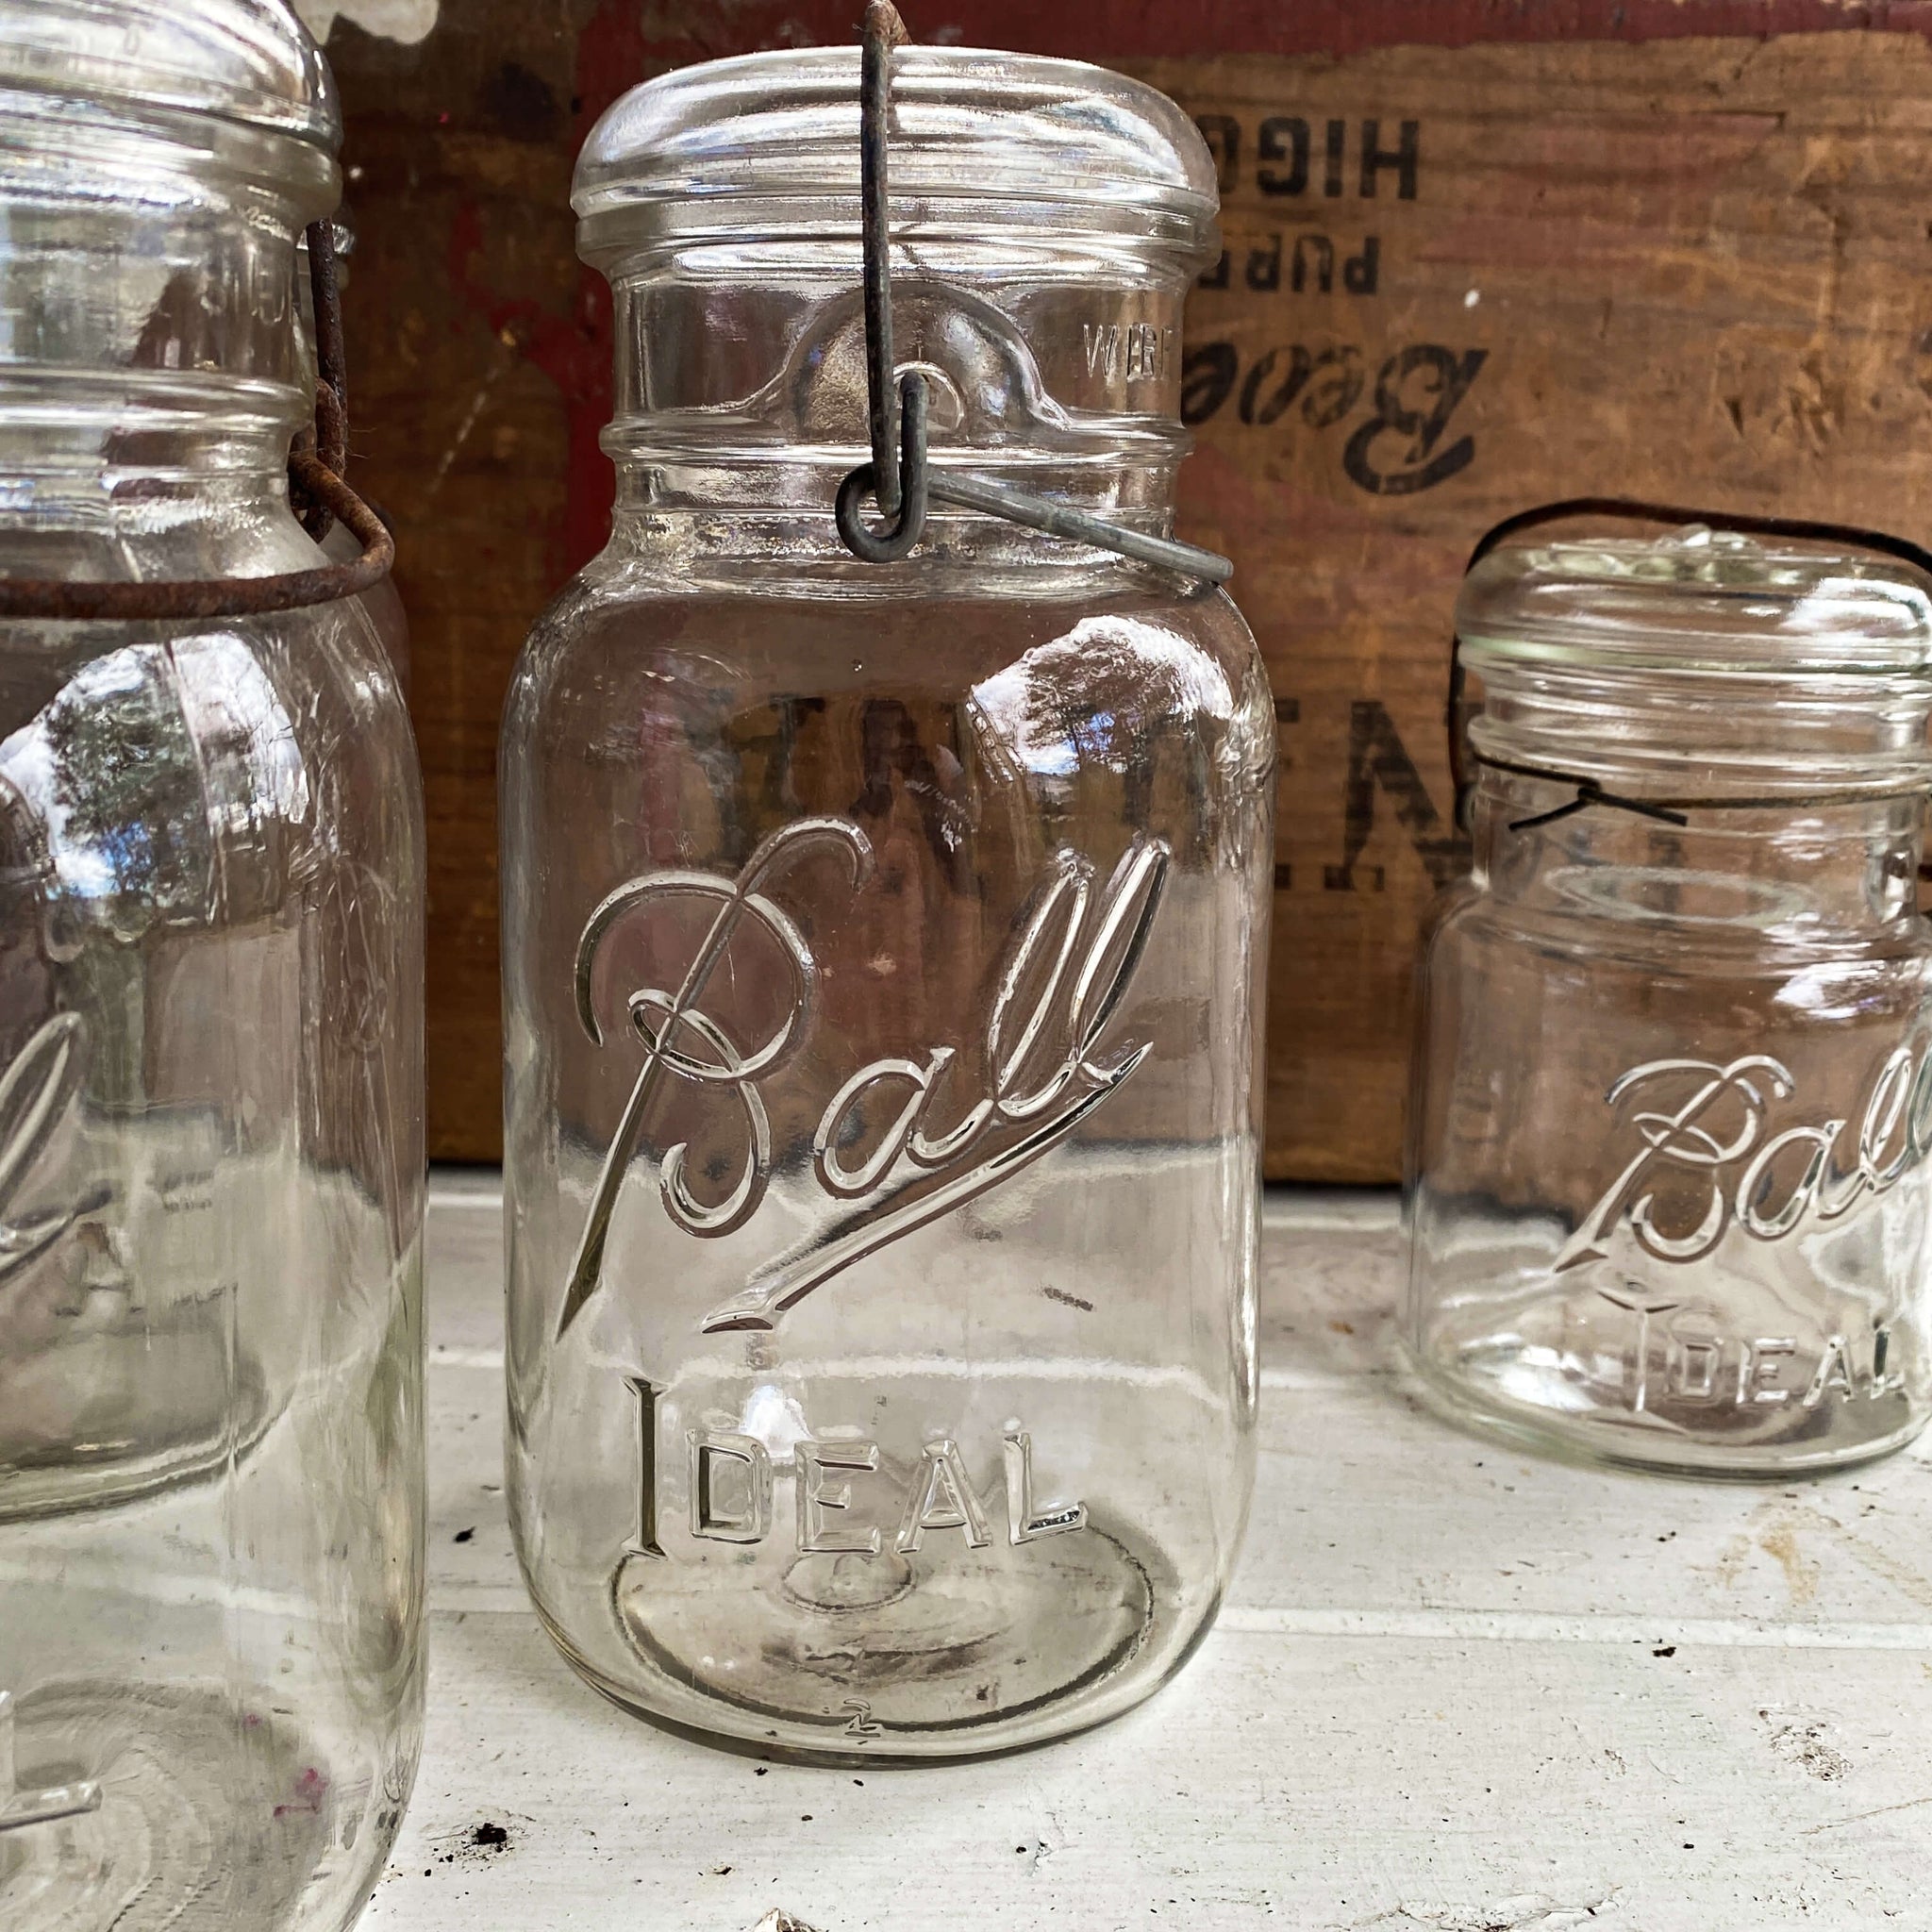 Antique Ball Ideal Canning Jars - Quart and Pint Sizes - 8 Jars Available circa 1923-1962